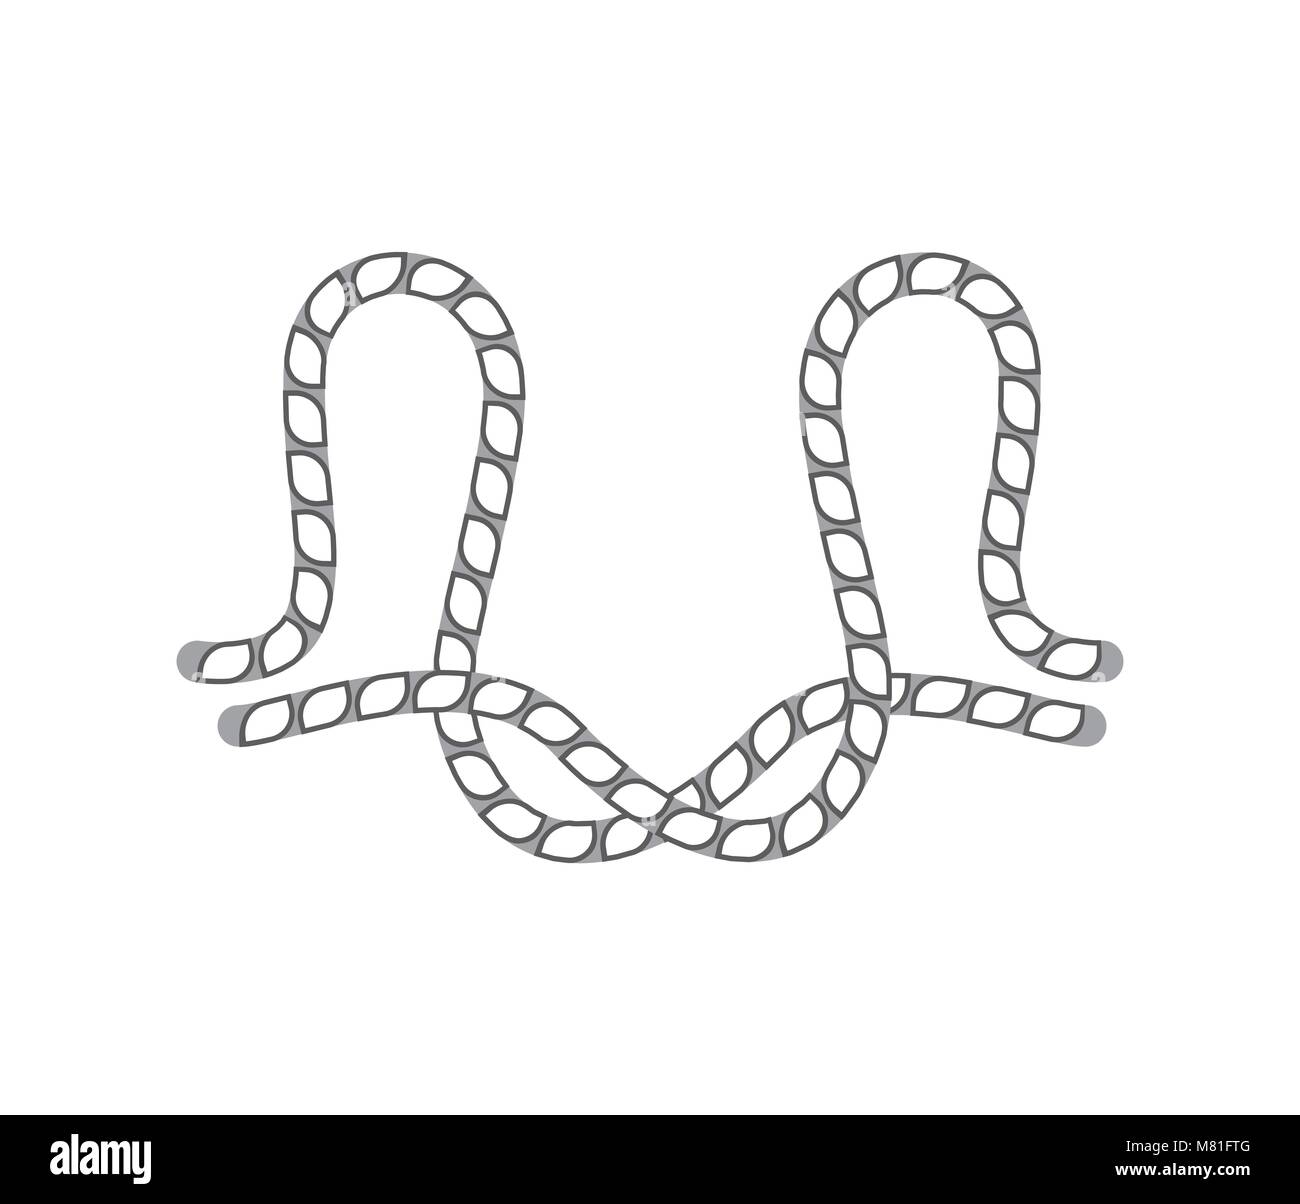 Rope knotting process vector icon Stock Vector